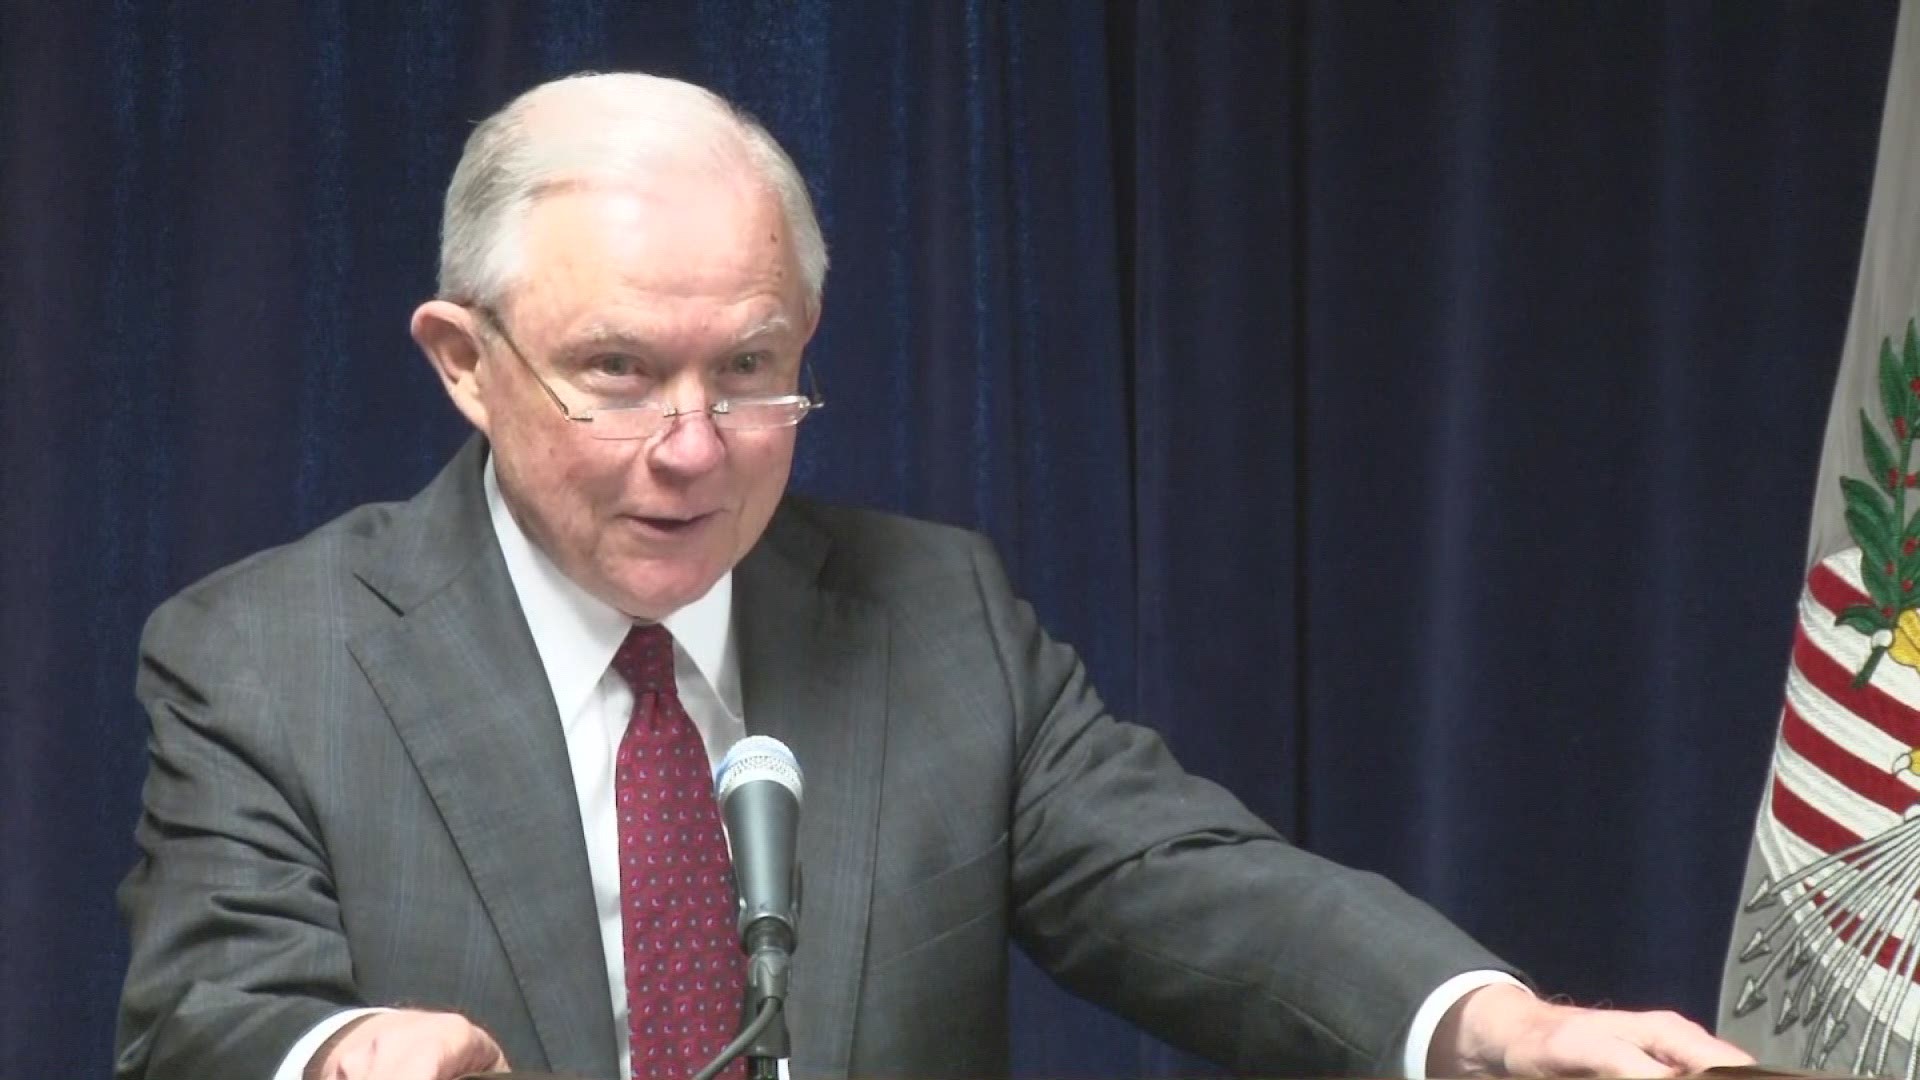 AG Jeff Sessions criticizes anti-police sentiment in US